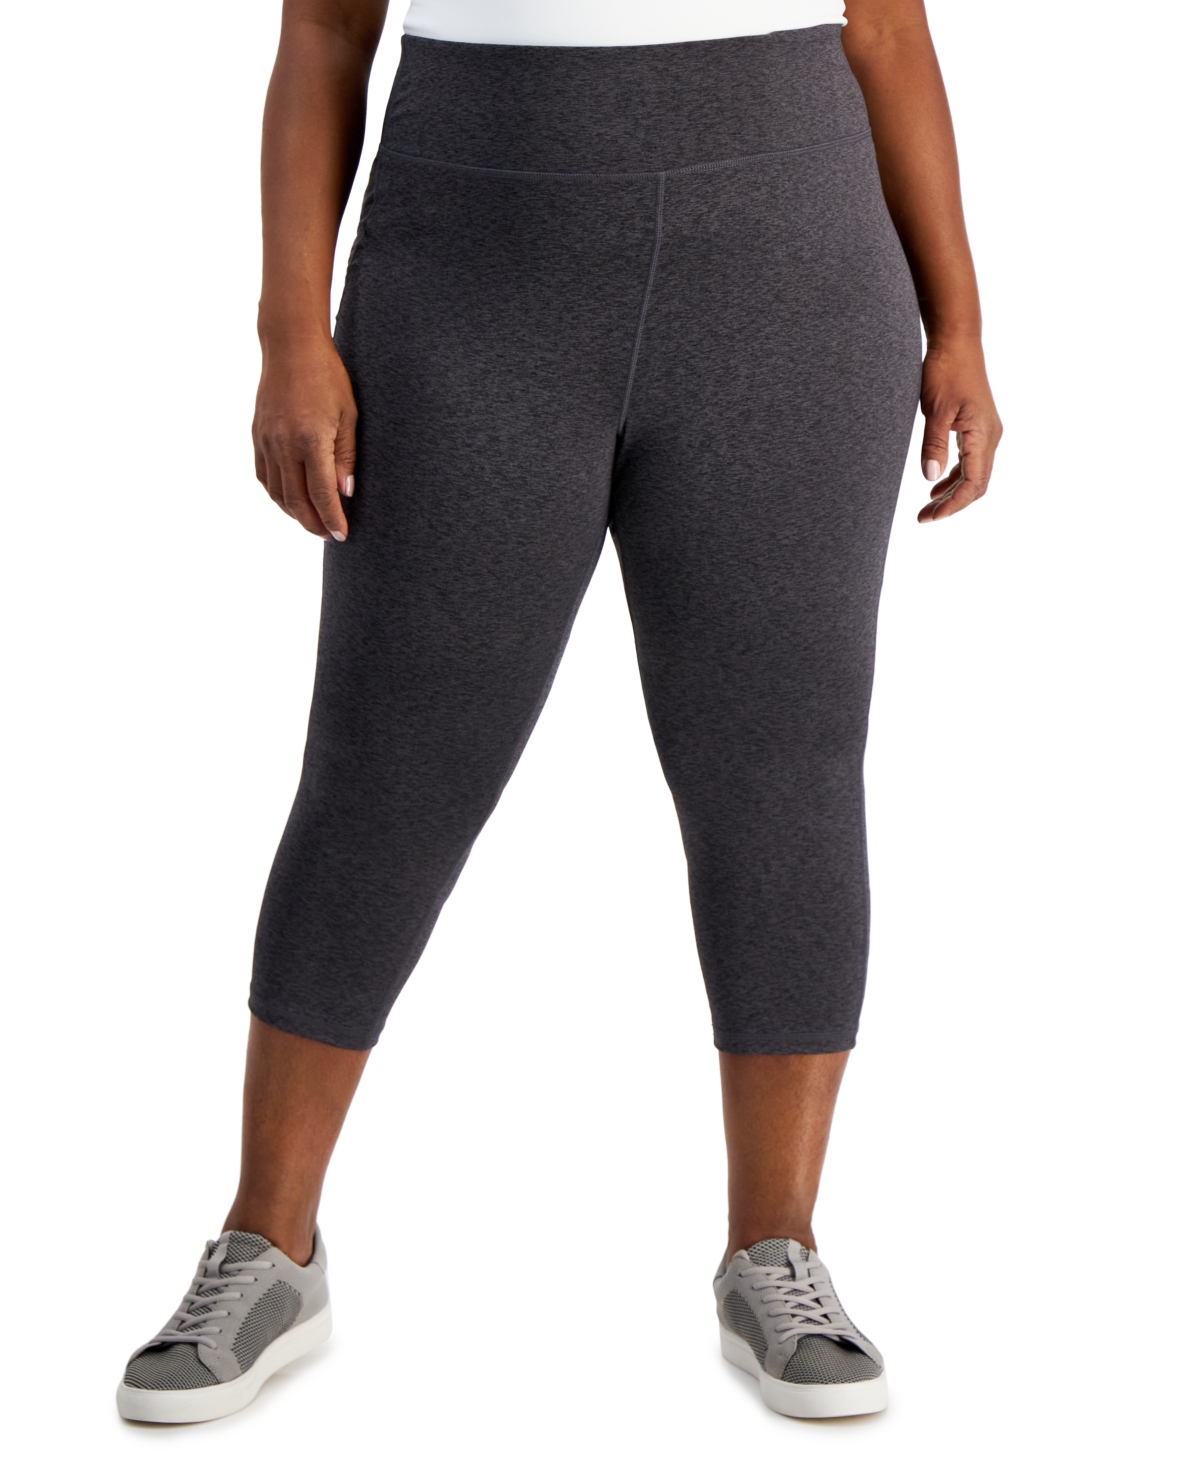 Plus Size Space-Dye Cropped Leggings, Created for Macy's - Navy Serenity/ Deep Black